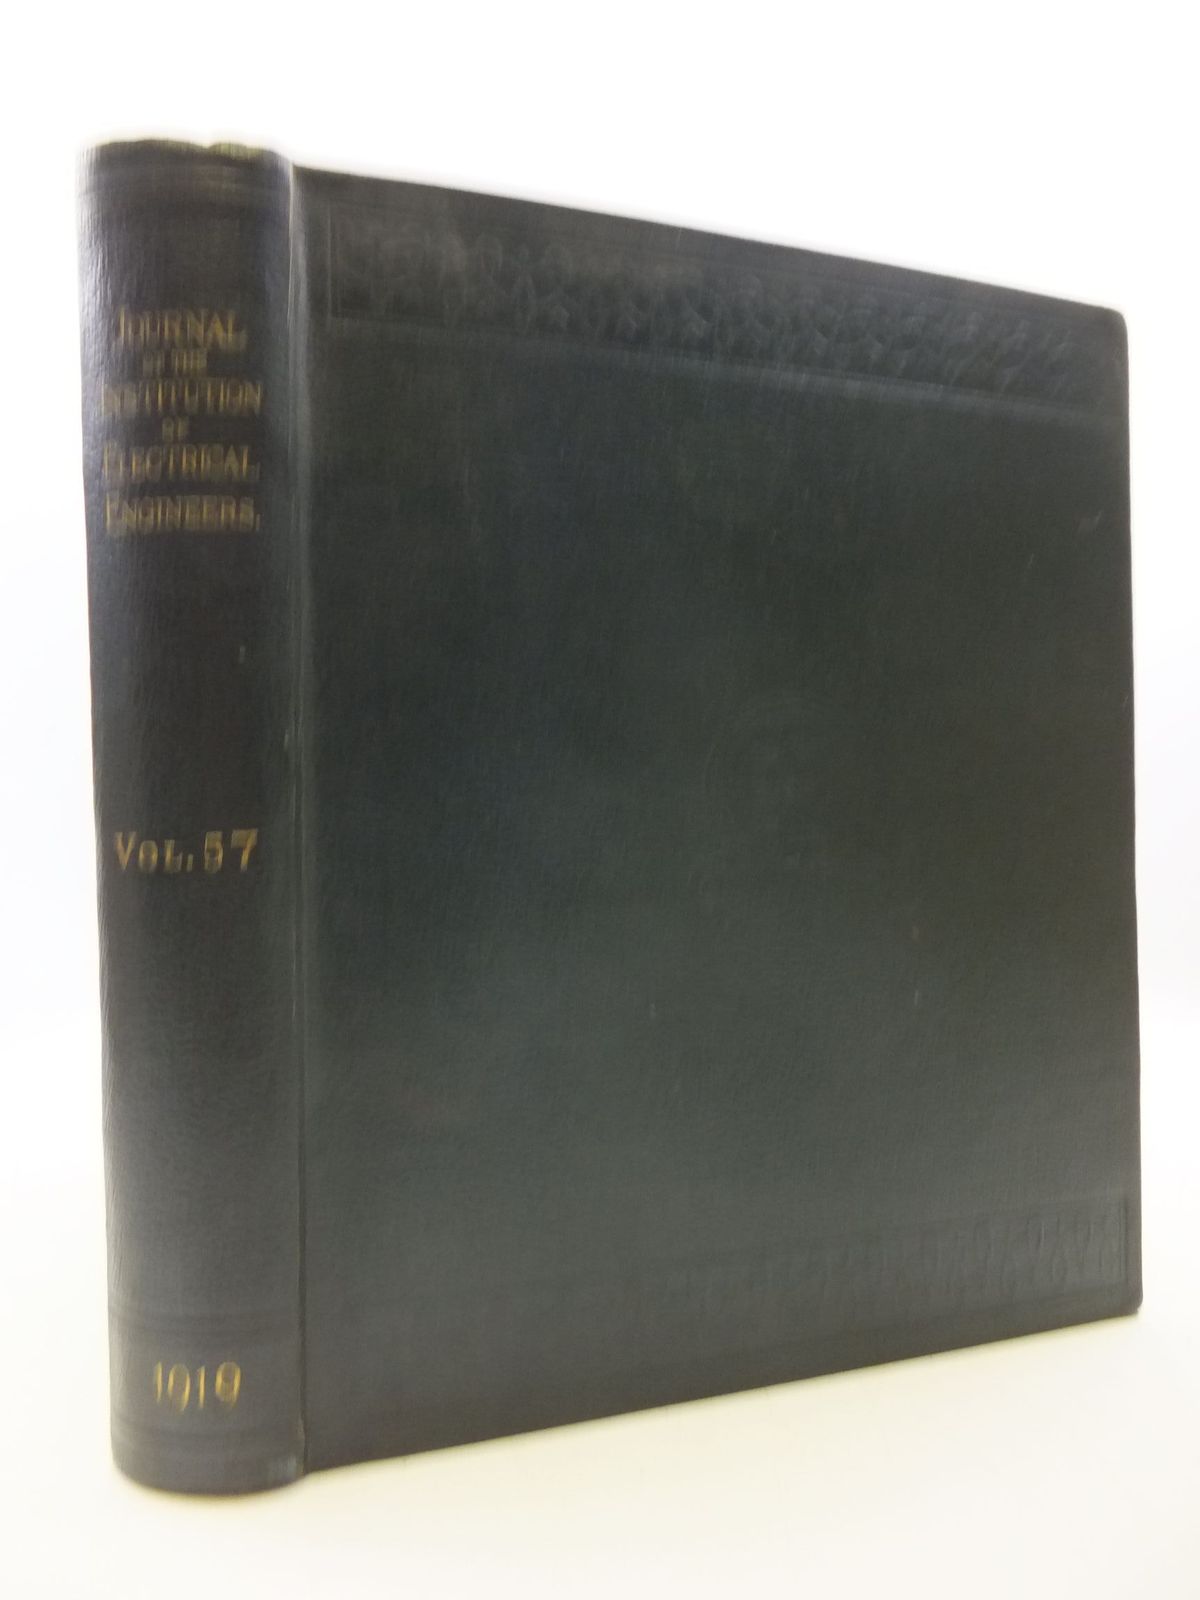 Photo of THE JOURNAL OF THE INSTITUTION OF ELECTRICAL ENGINEERS VOL. 57 written by Rowell, P.F. published by E. & F.N. Spon Limited (STOCK CODE: 2110415)  for sale by Stella & Rose's Books